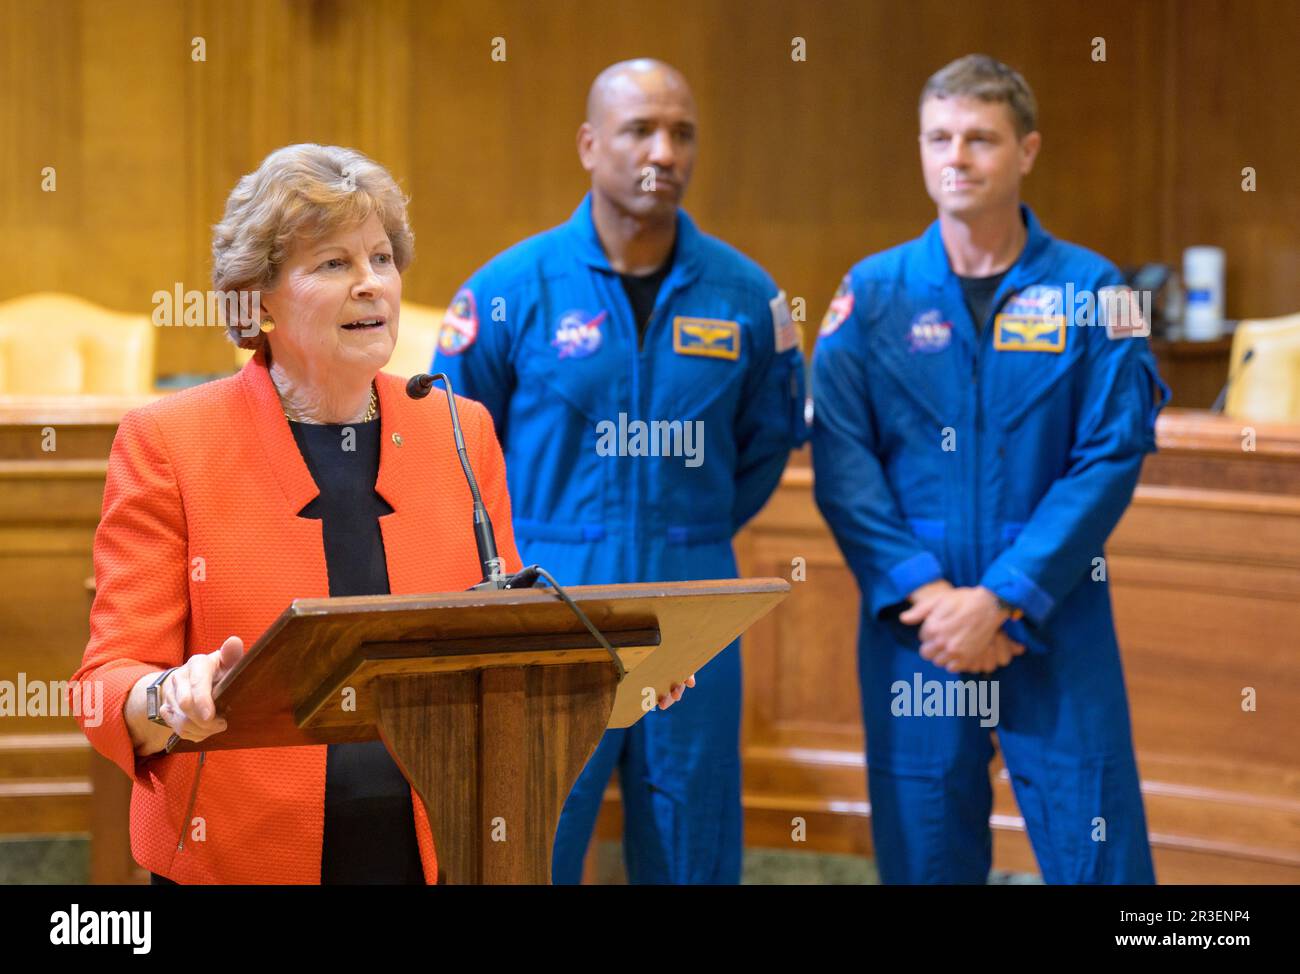 Washington, United States. 17 May, 2023. U.S. Senator Jeanne Shaheen, D-N.H., delivers remarks during a meet and greet with Congress to discuss the upcoming moon mission at the Dirksen Senate Office Building, May 17, 2023 in Washington, D.C. Astronauts Jeremy Hansen, Victor Glover, Reid Wiseman, and Christina Hammock Koch visited Congress to brief members on the mission to the moon. Credit: Bill Ingalls/NASA/Alamy Live News Stock Photo